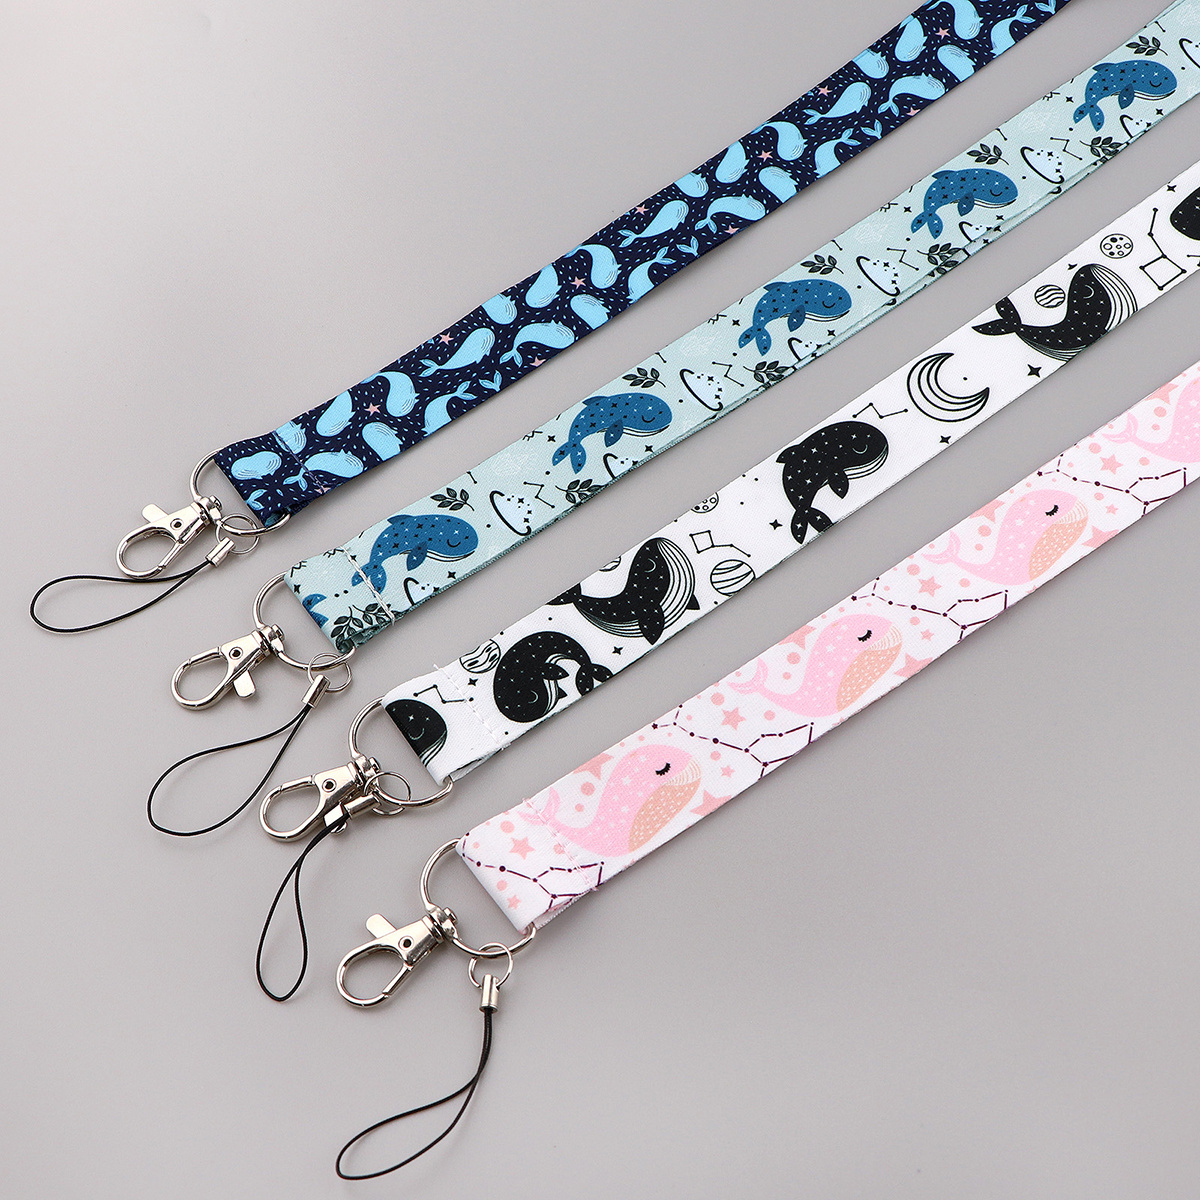 Cute Fashion Whale Lanyards For Keys Neck Strap Key Chain Badge